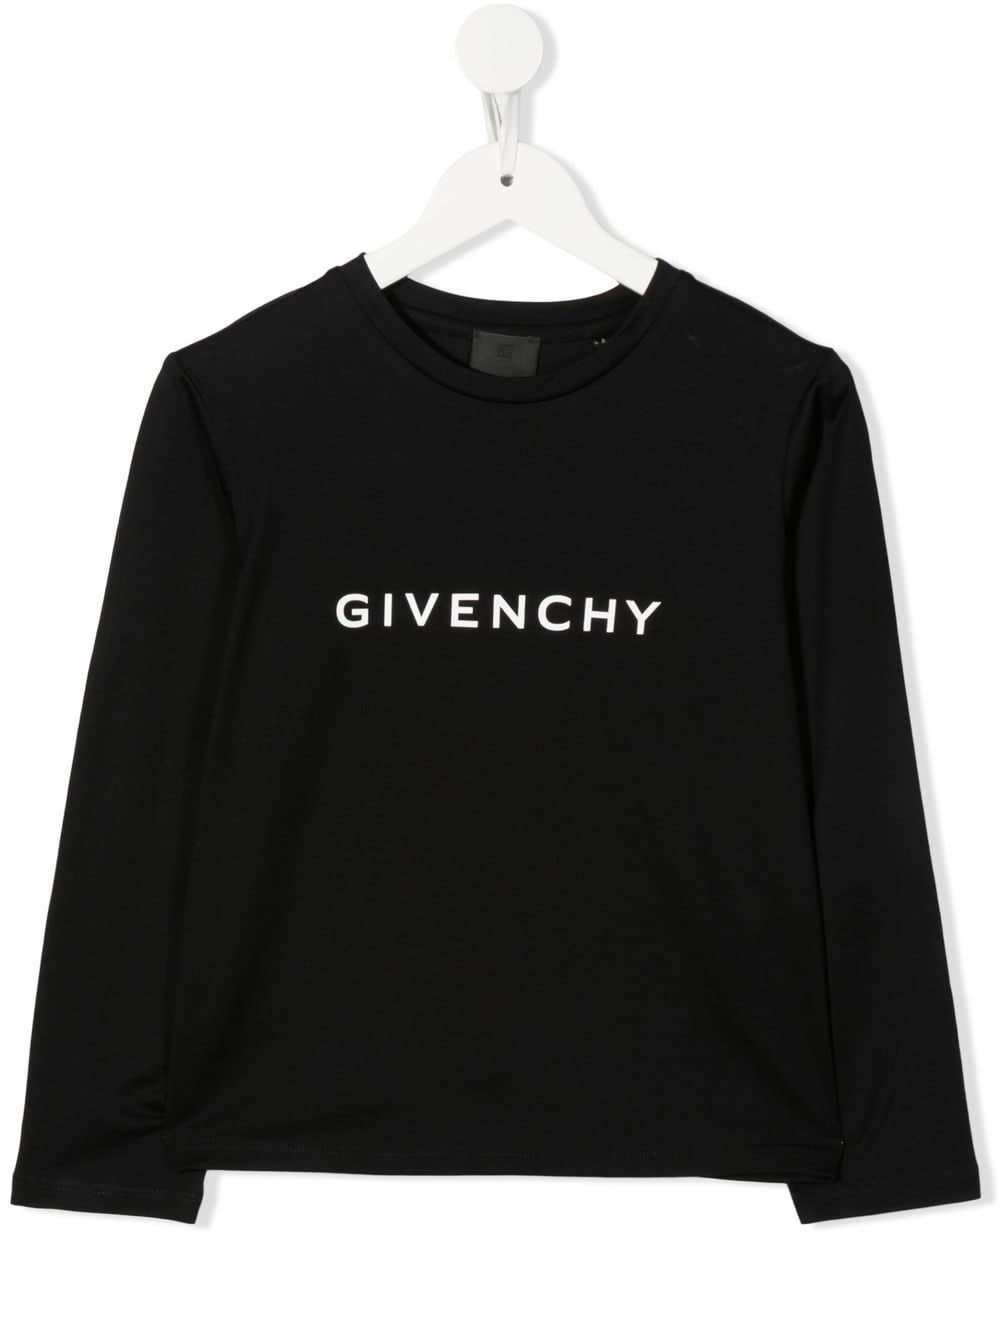 Givenchy Kids Black Long Sleeve T-shirt With Signature And Logo